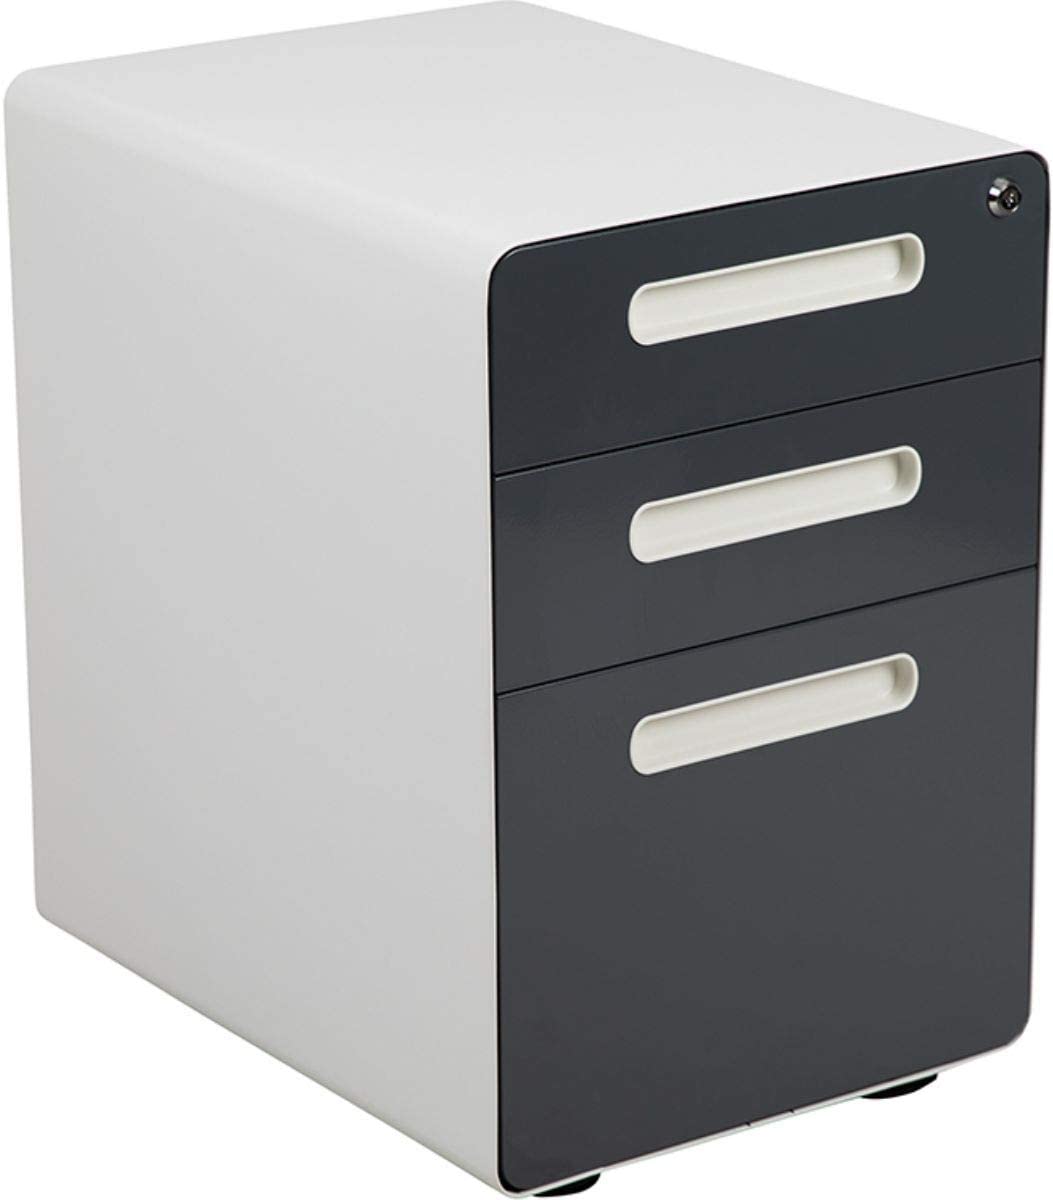 Wren Ergonomic 3-Drawer Mobile Locking Filing Cabinet with Anti-Tilt Mechanism & Letter/Legal Drawer, White with Charcoal Faceplate